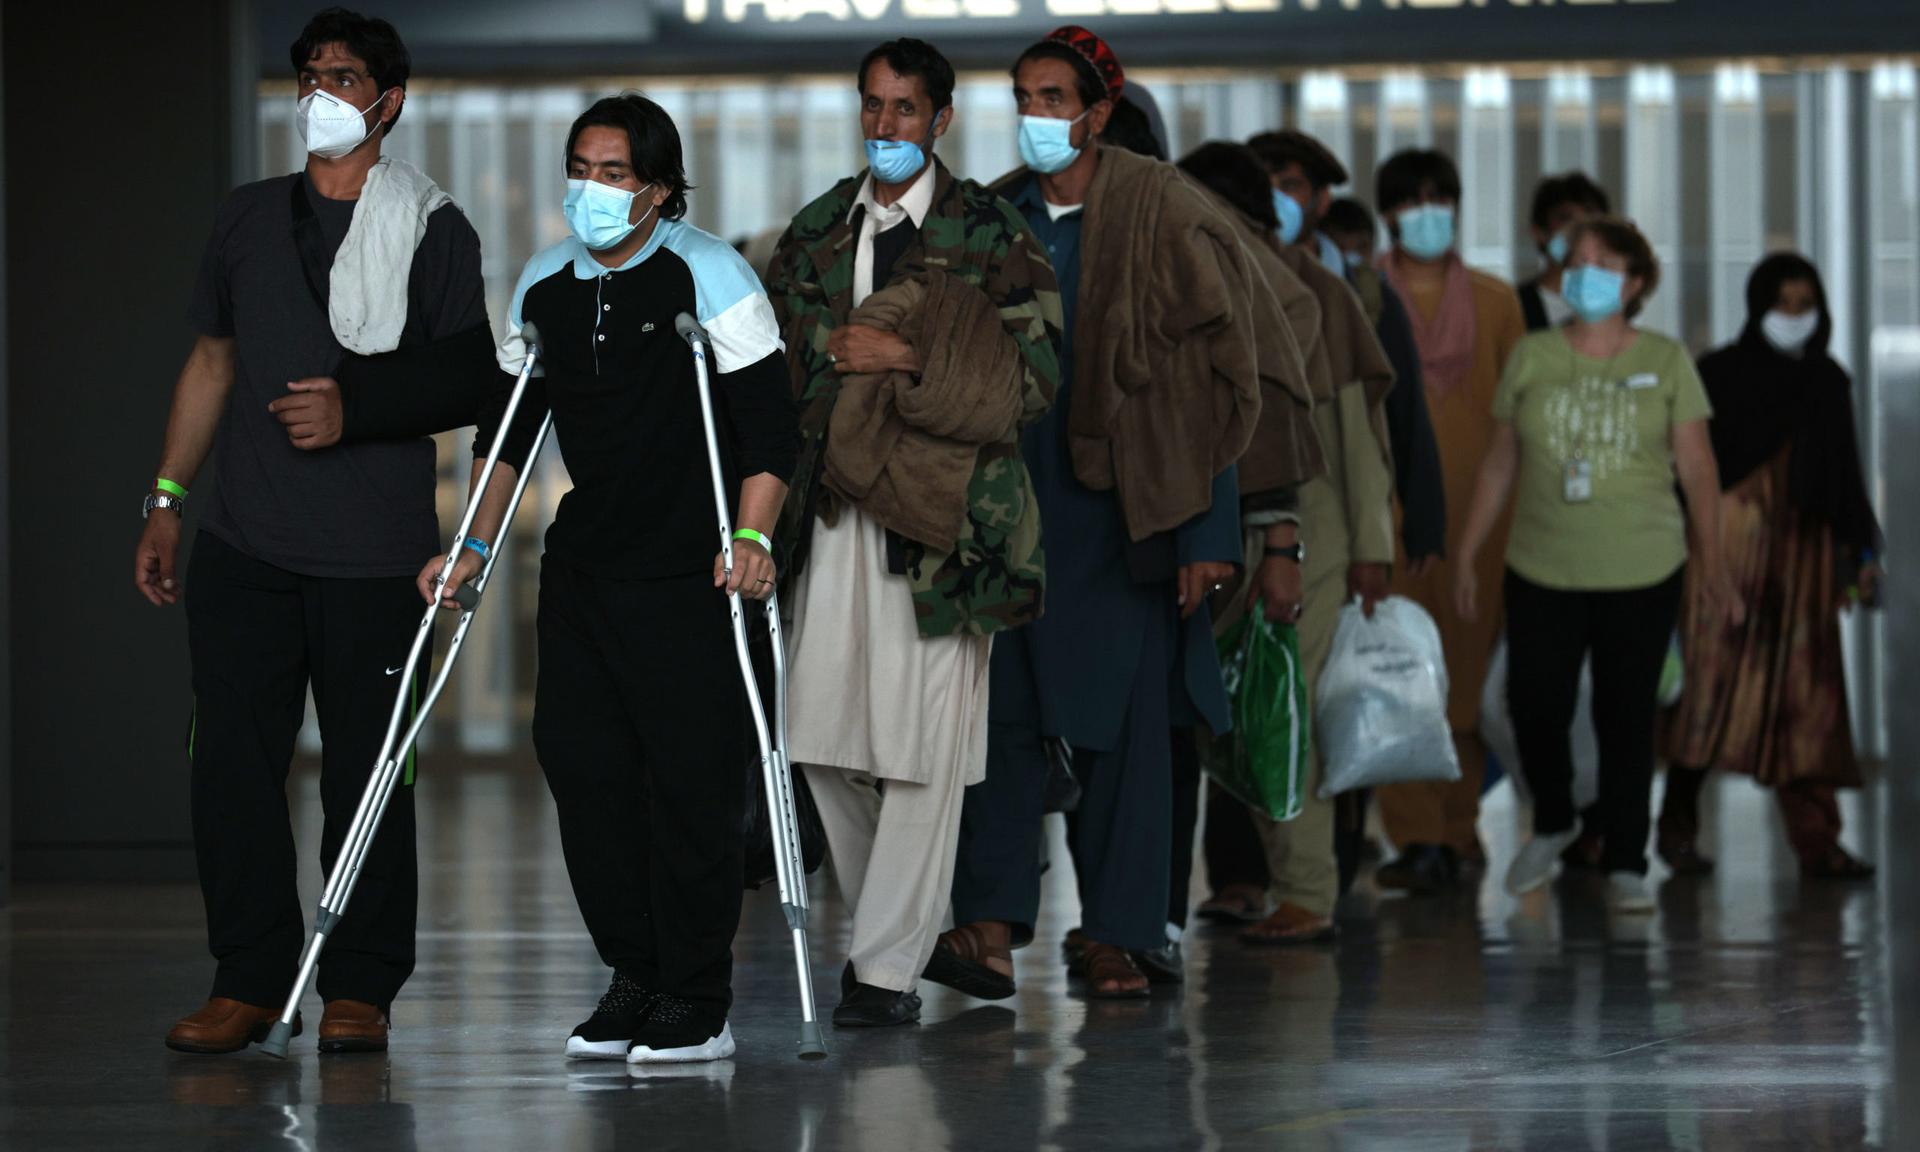 Refugees who were evacuated from Afghanistan last August walk through Dulles International Airport, from which they were later taken to a refugee processing center. (Photo by Anna Moneymaker/Getty Images)